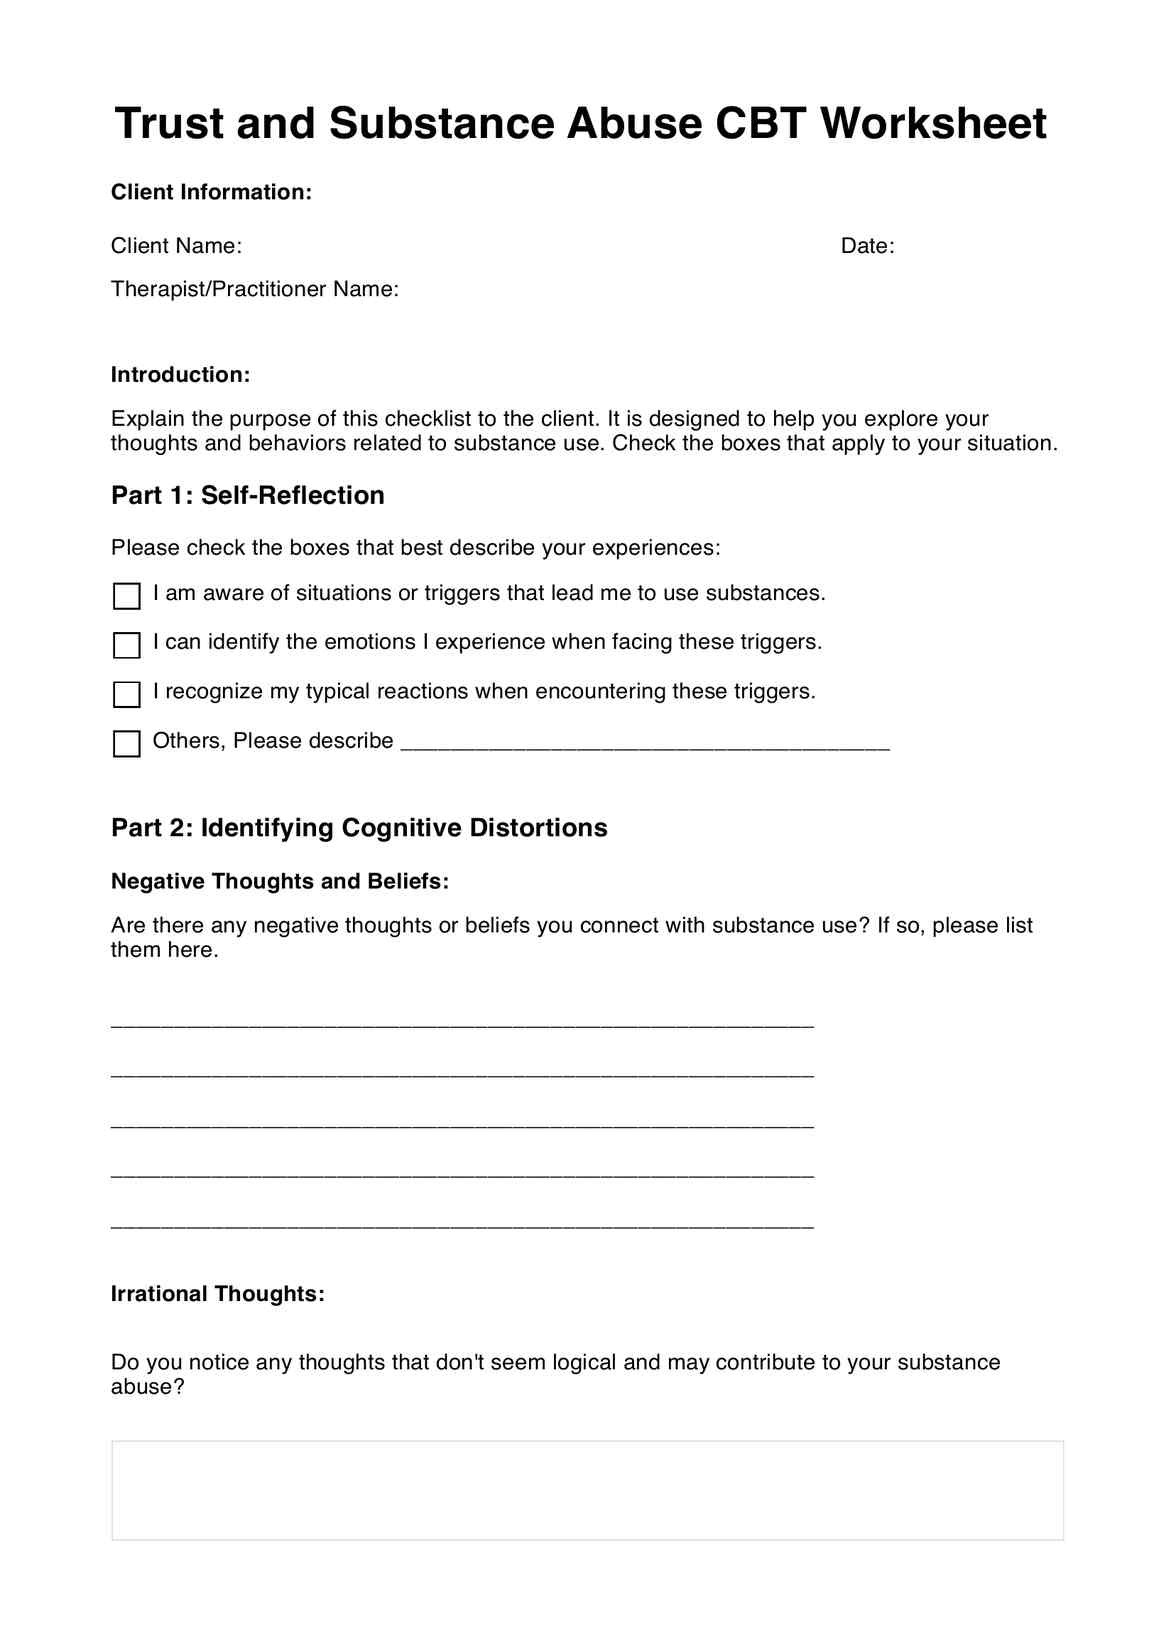 Trust and Substance Abuse CBT Worksheet PDF Example